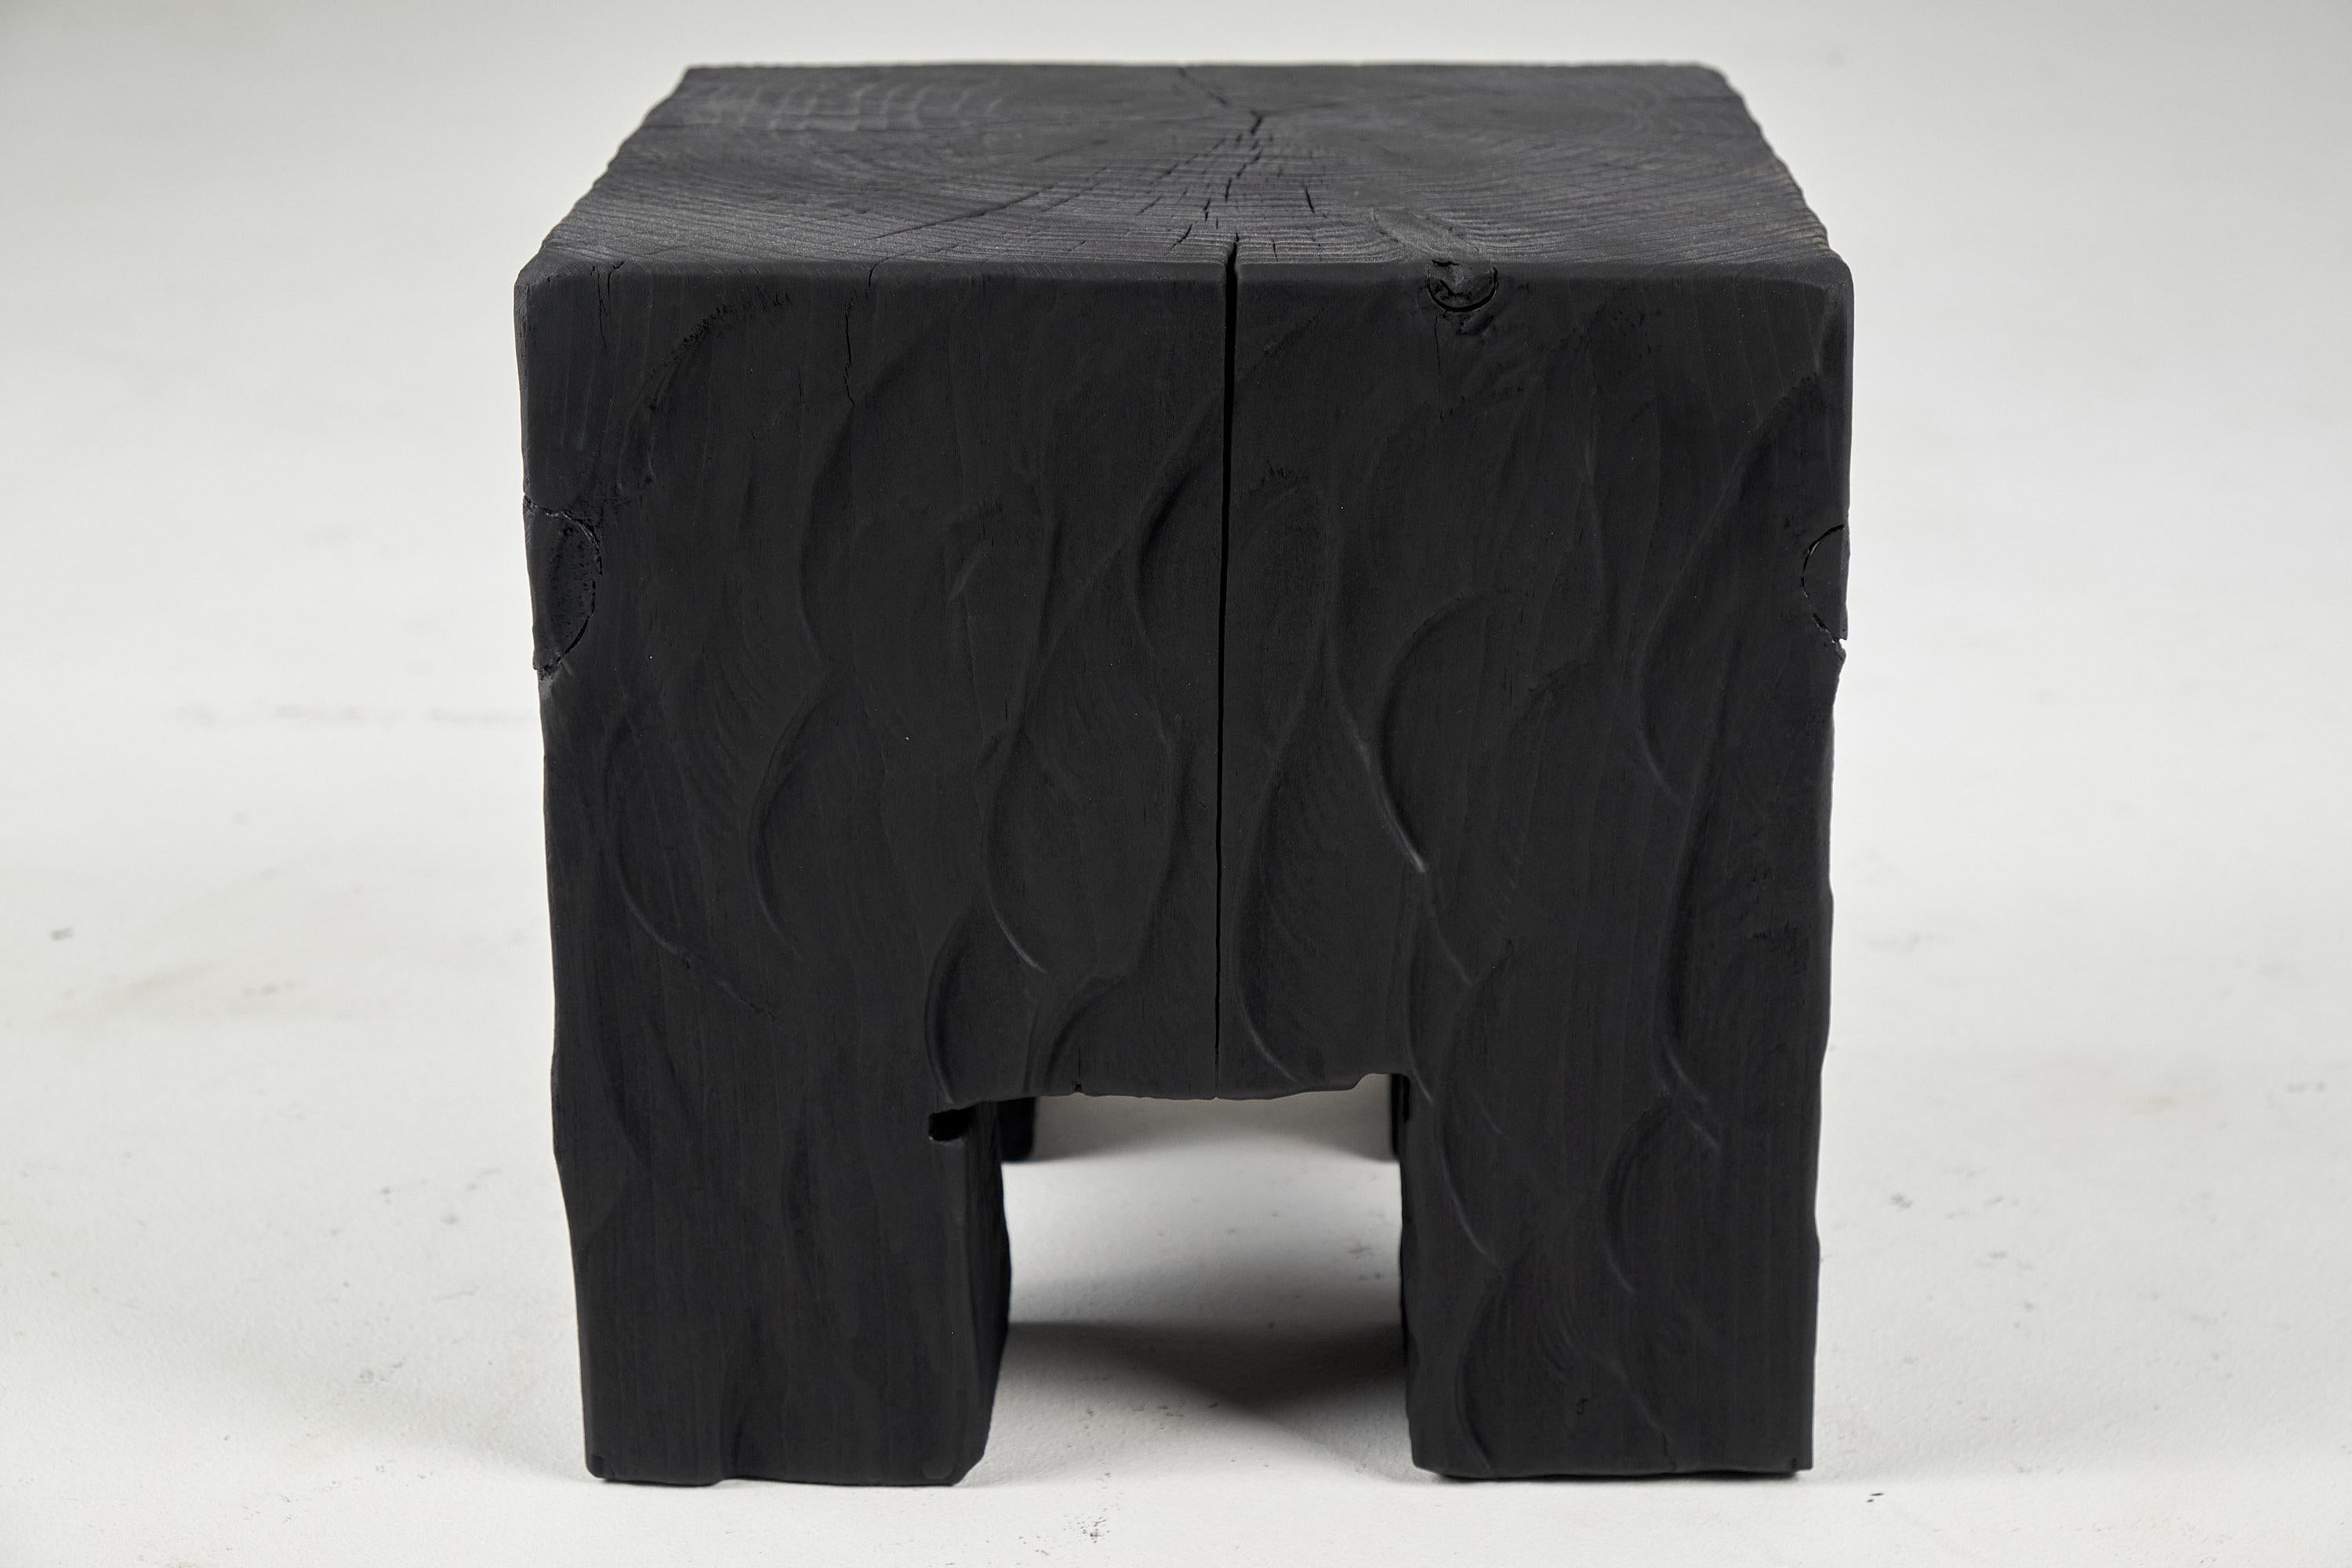 Unique chainsaw carved wooden rustic stool/side table. Carved from a single piece of wood and protected with the highest quality oils, ensuring durability for generations. Such unique handmade design will highlight your interior and bring comfort to